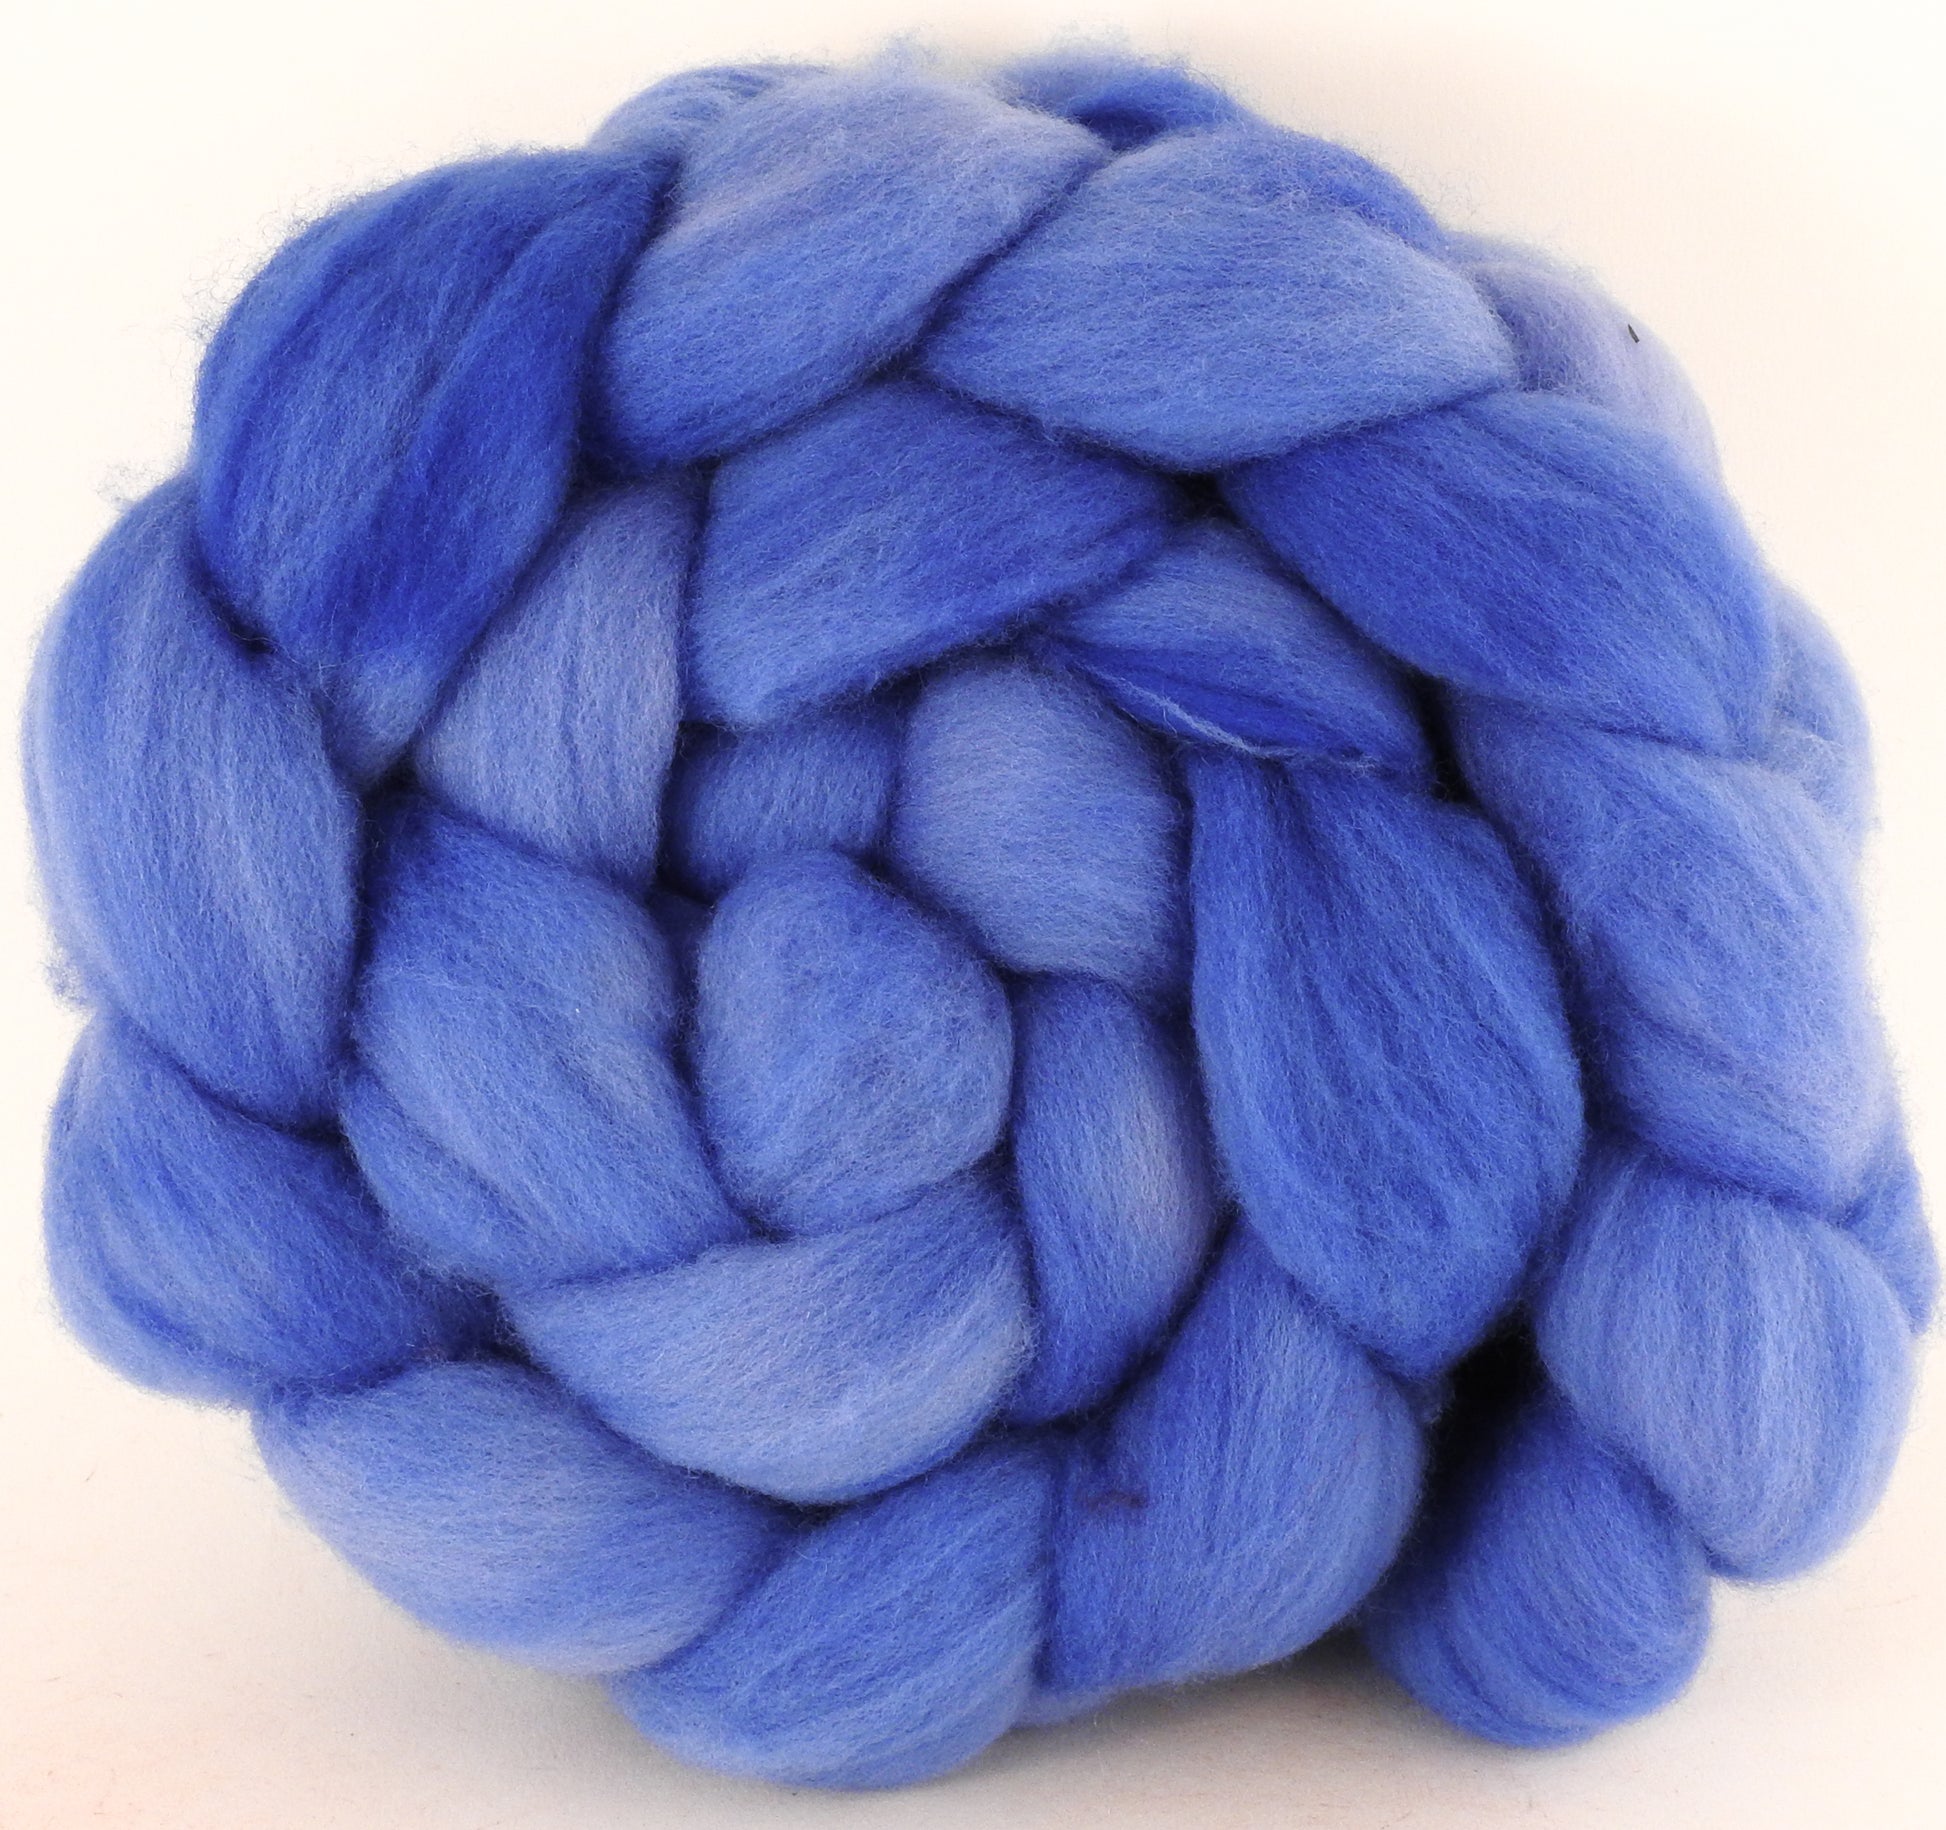 Hand dyed top for spinning - Bluebell - (6 oz.) Organic Polwarth - Inglenook Fibers